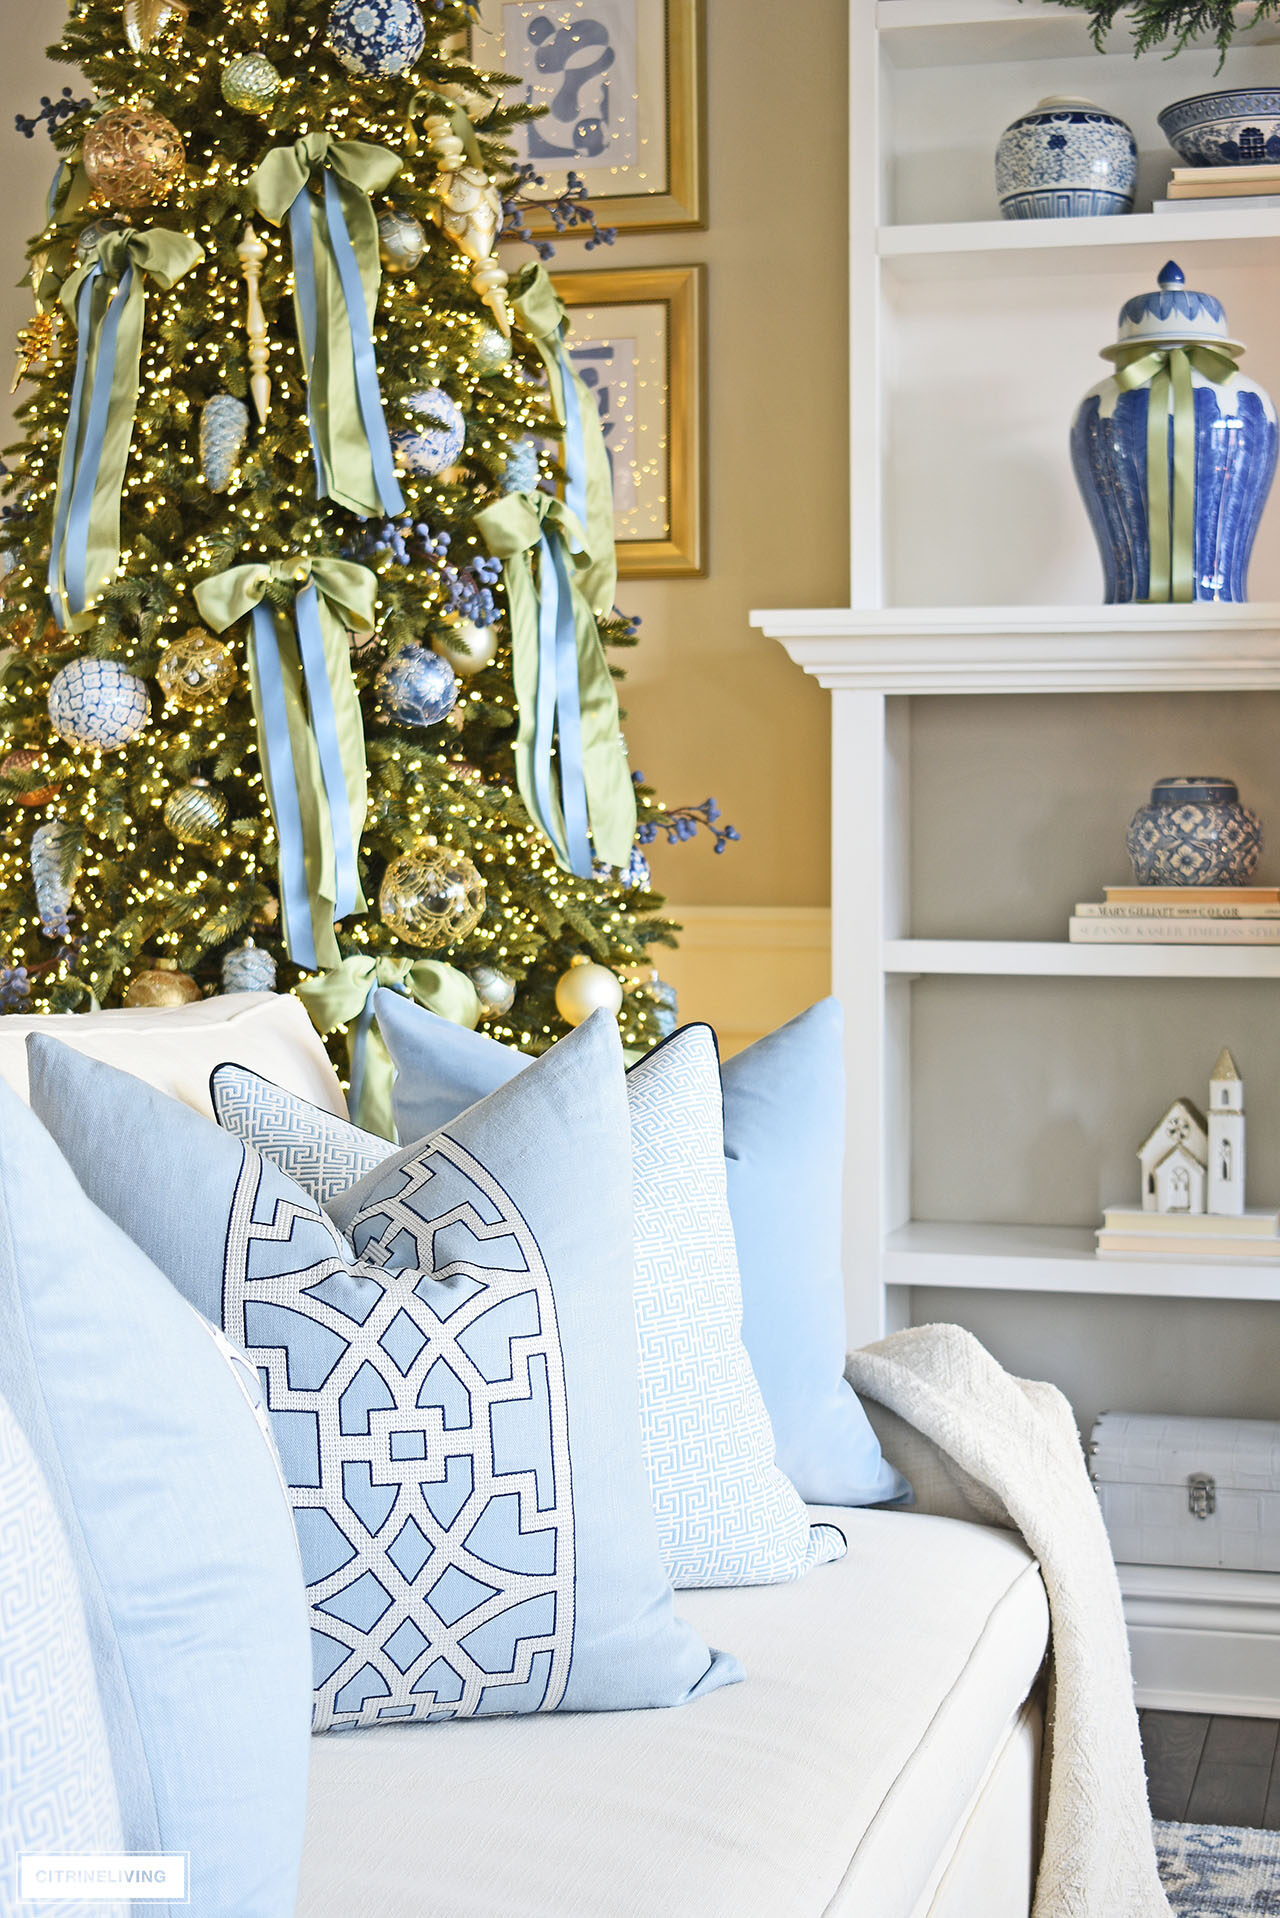 Blue and white throw pillows on a white sofa, Christmas tree decorated with light green and blue bows sits behind.